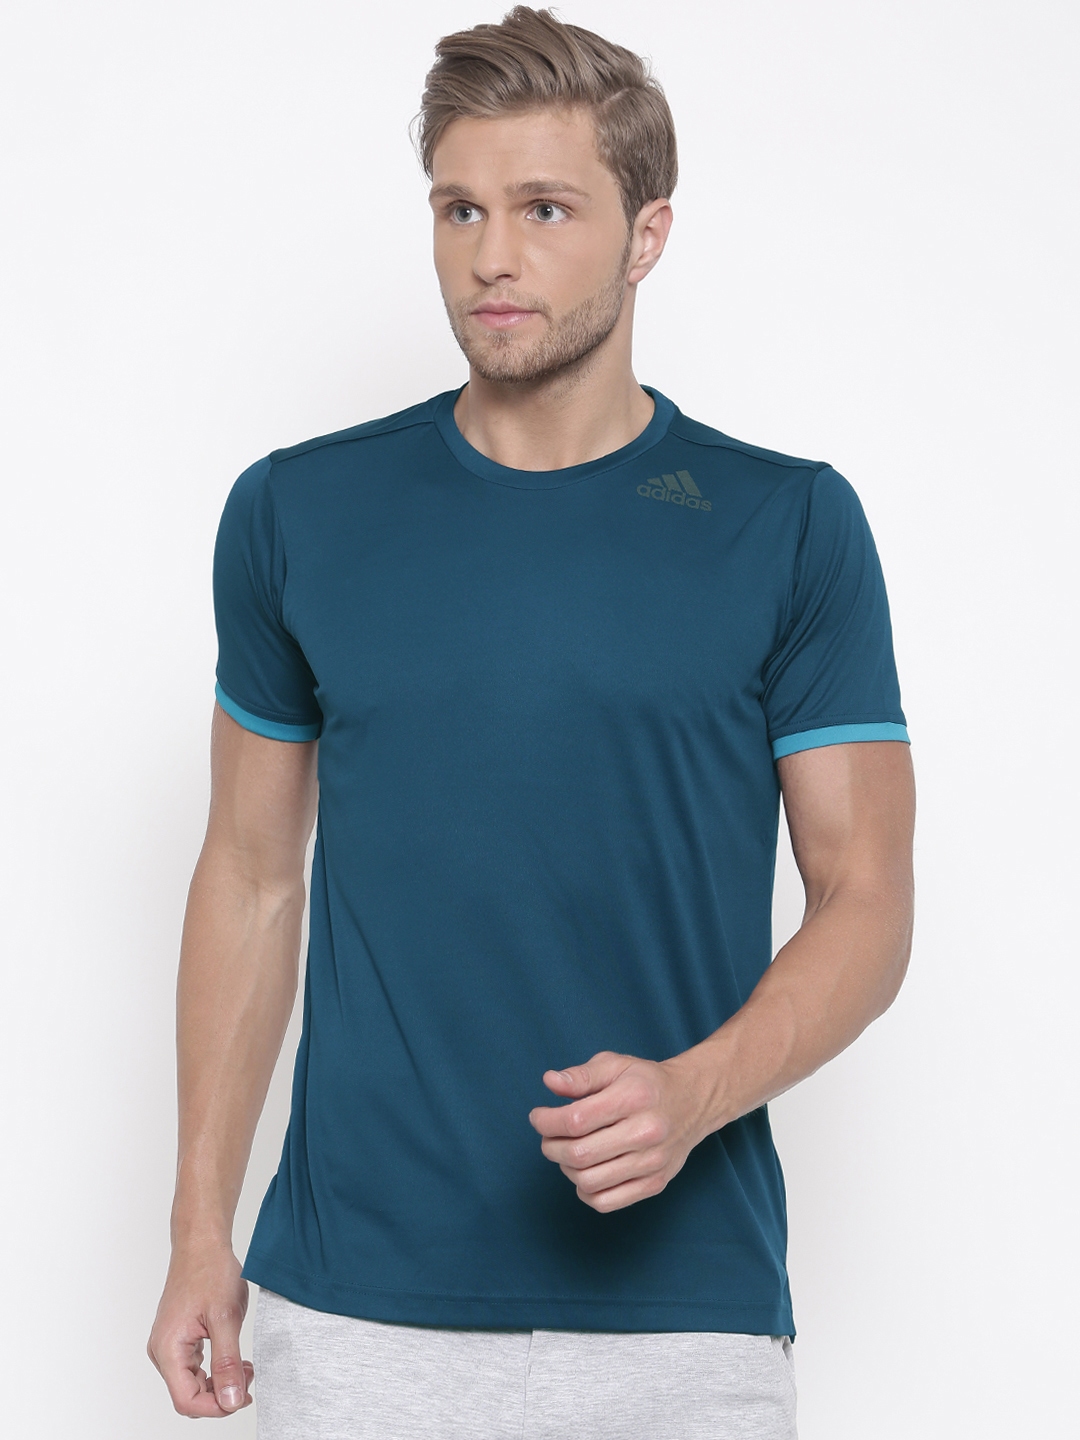 Buy ADIDAS Men Teal Blue FREELIFT Clean Solid Round Neck T Shirt ...